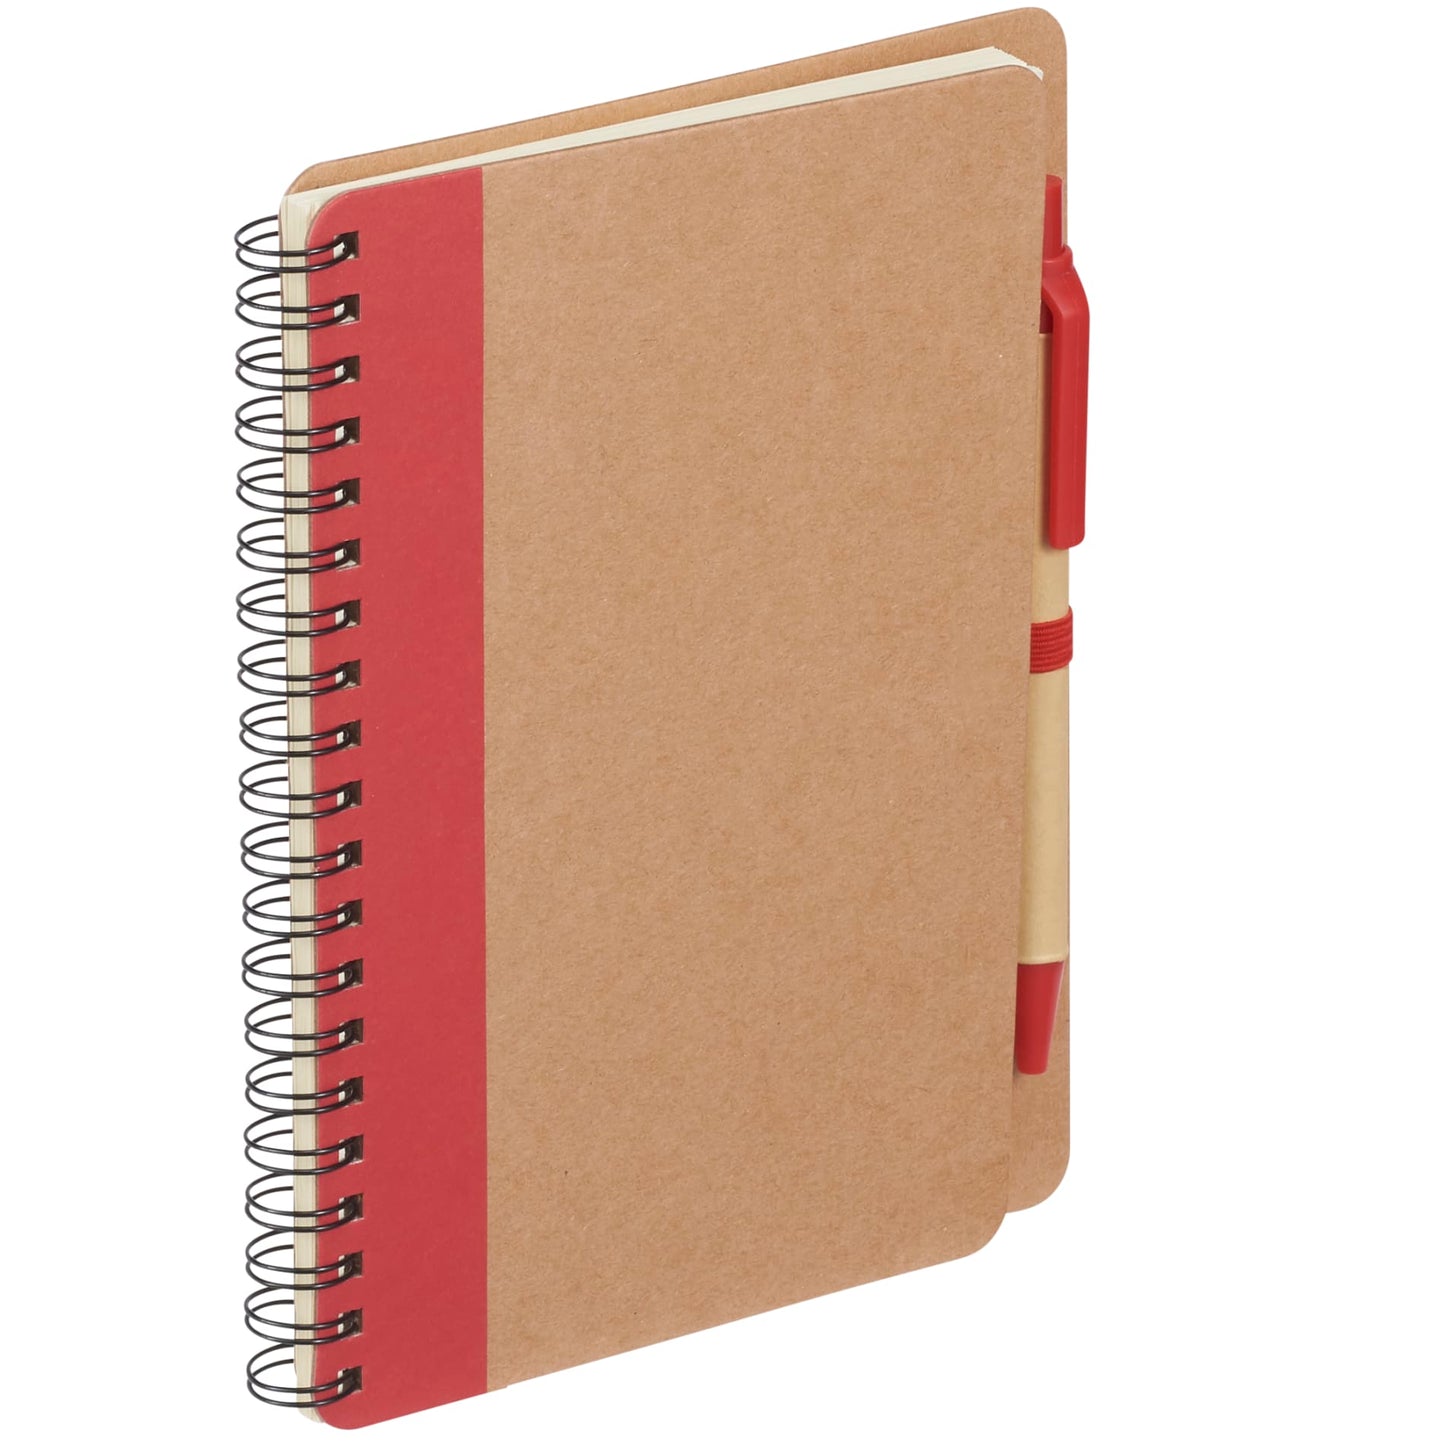 5" x 7" Eco-Friendly Spiral Notebook with Pen